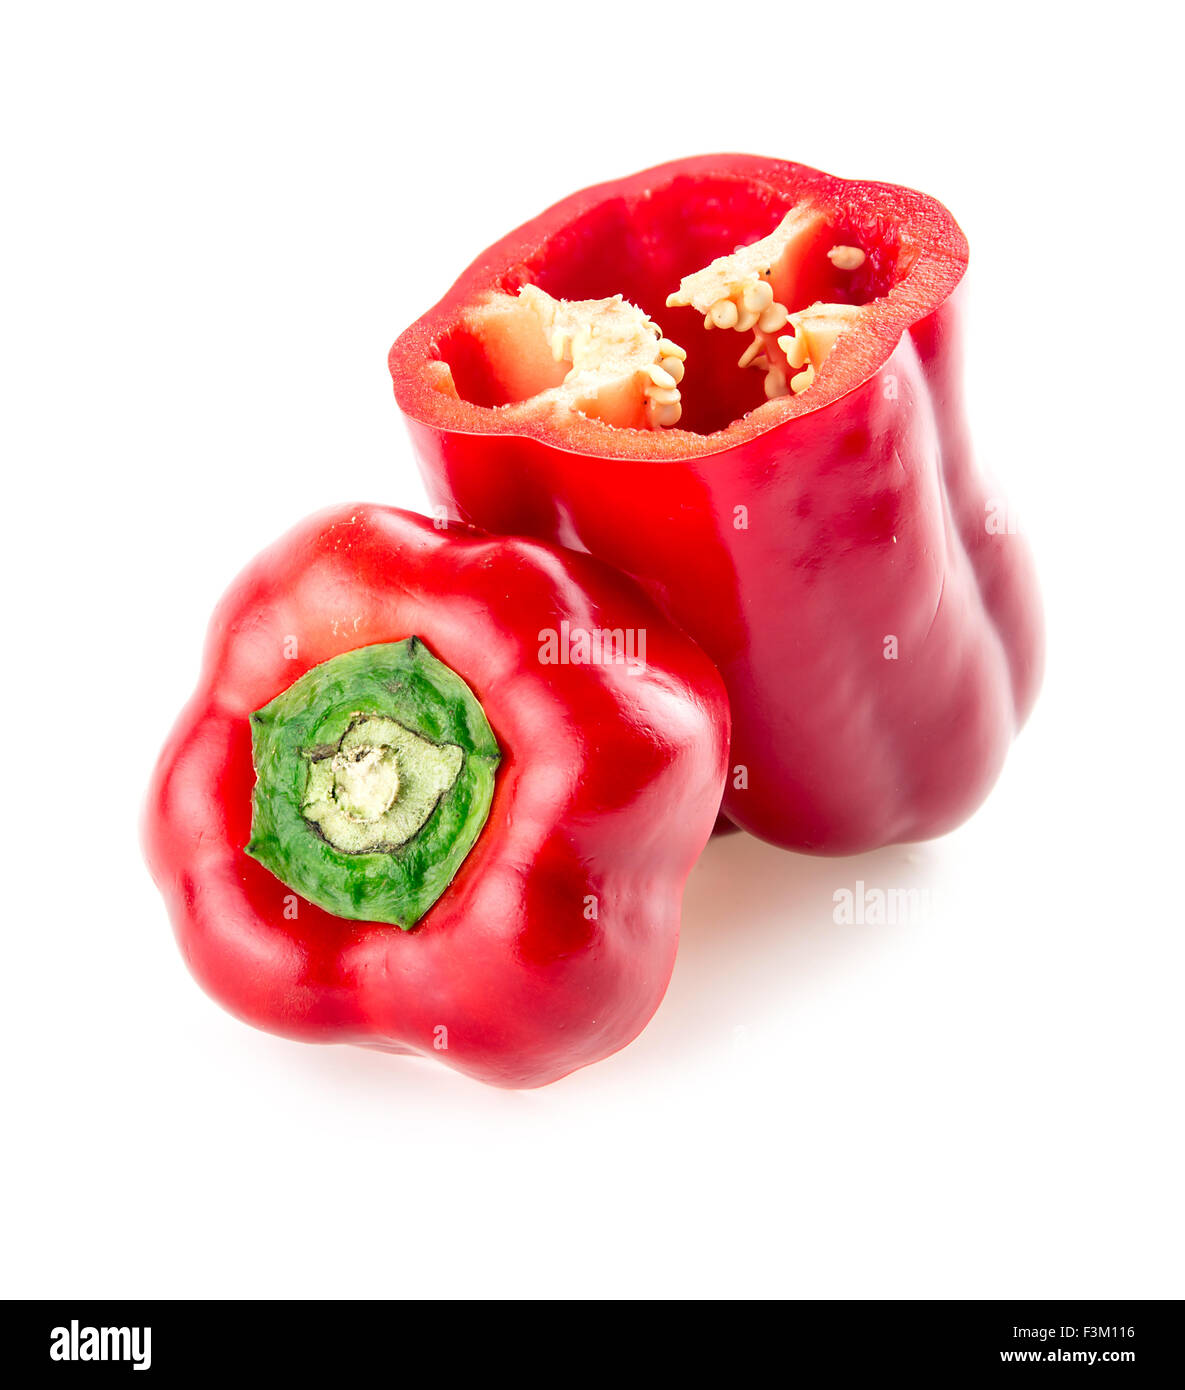 Declicious red bell pepper cut Stock Photo